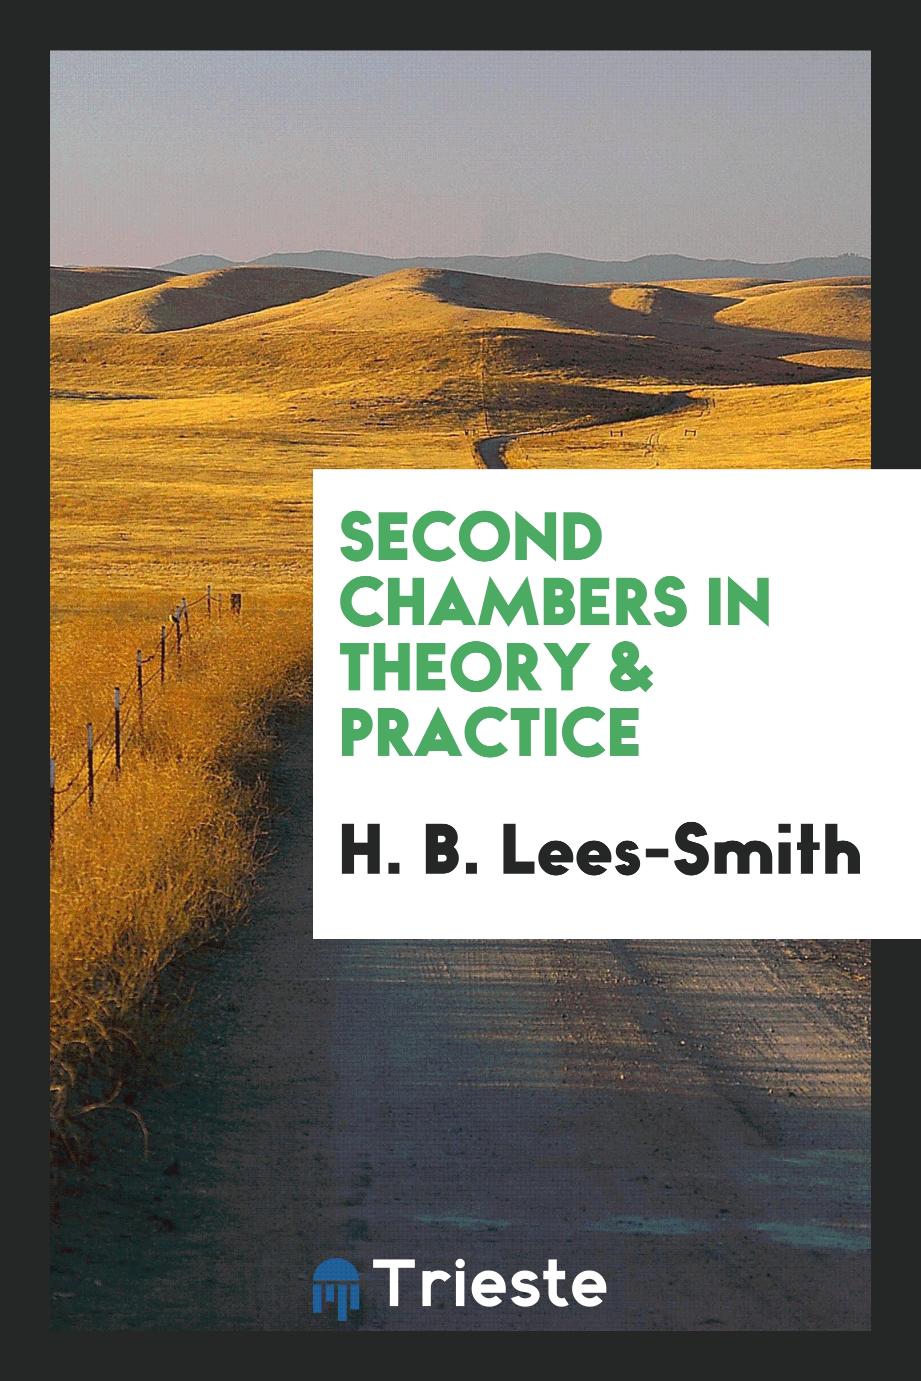 Second chambers in theory & practice